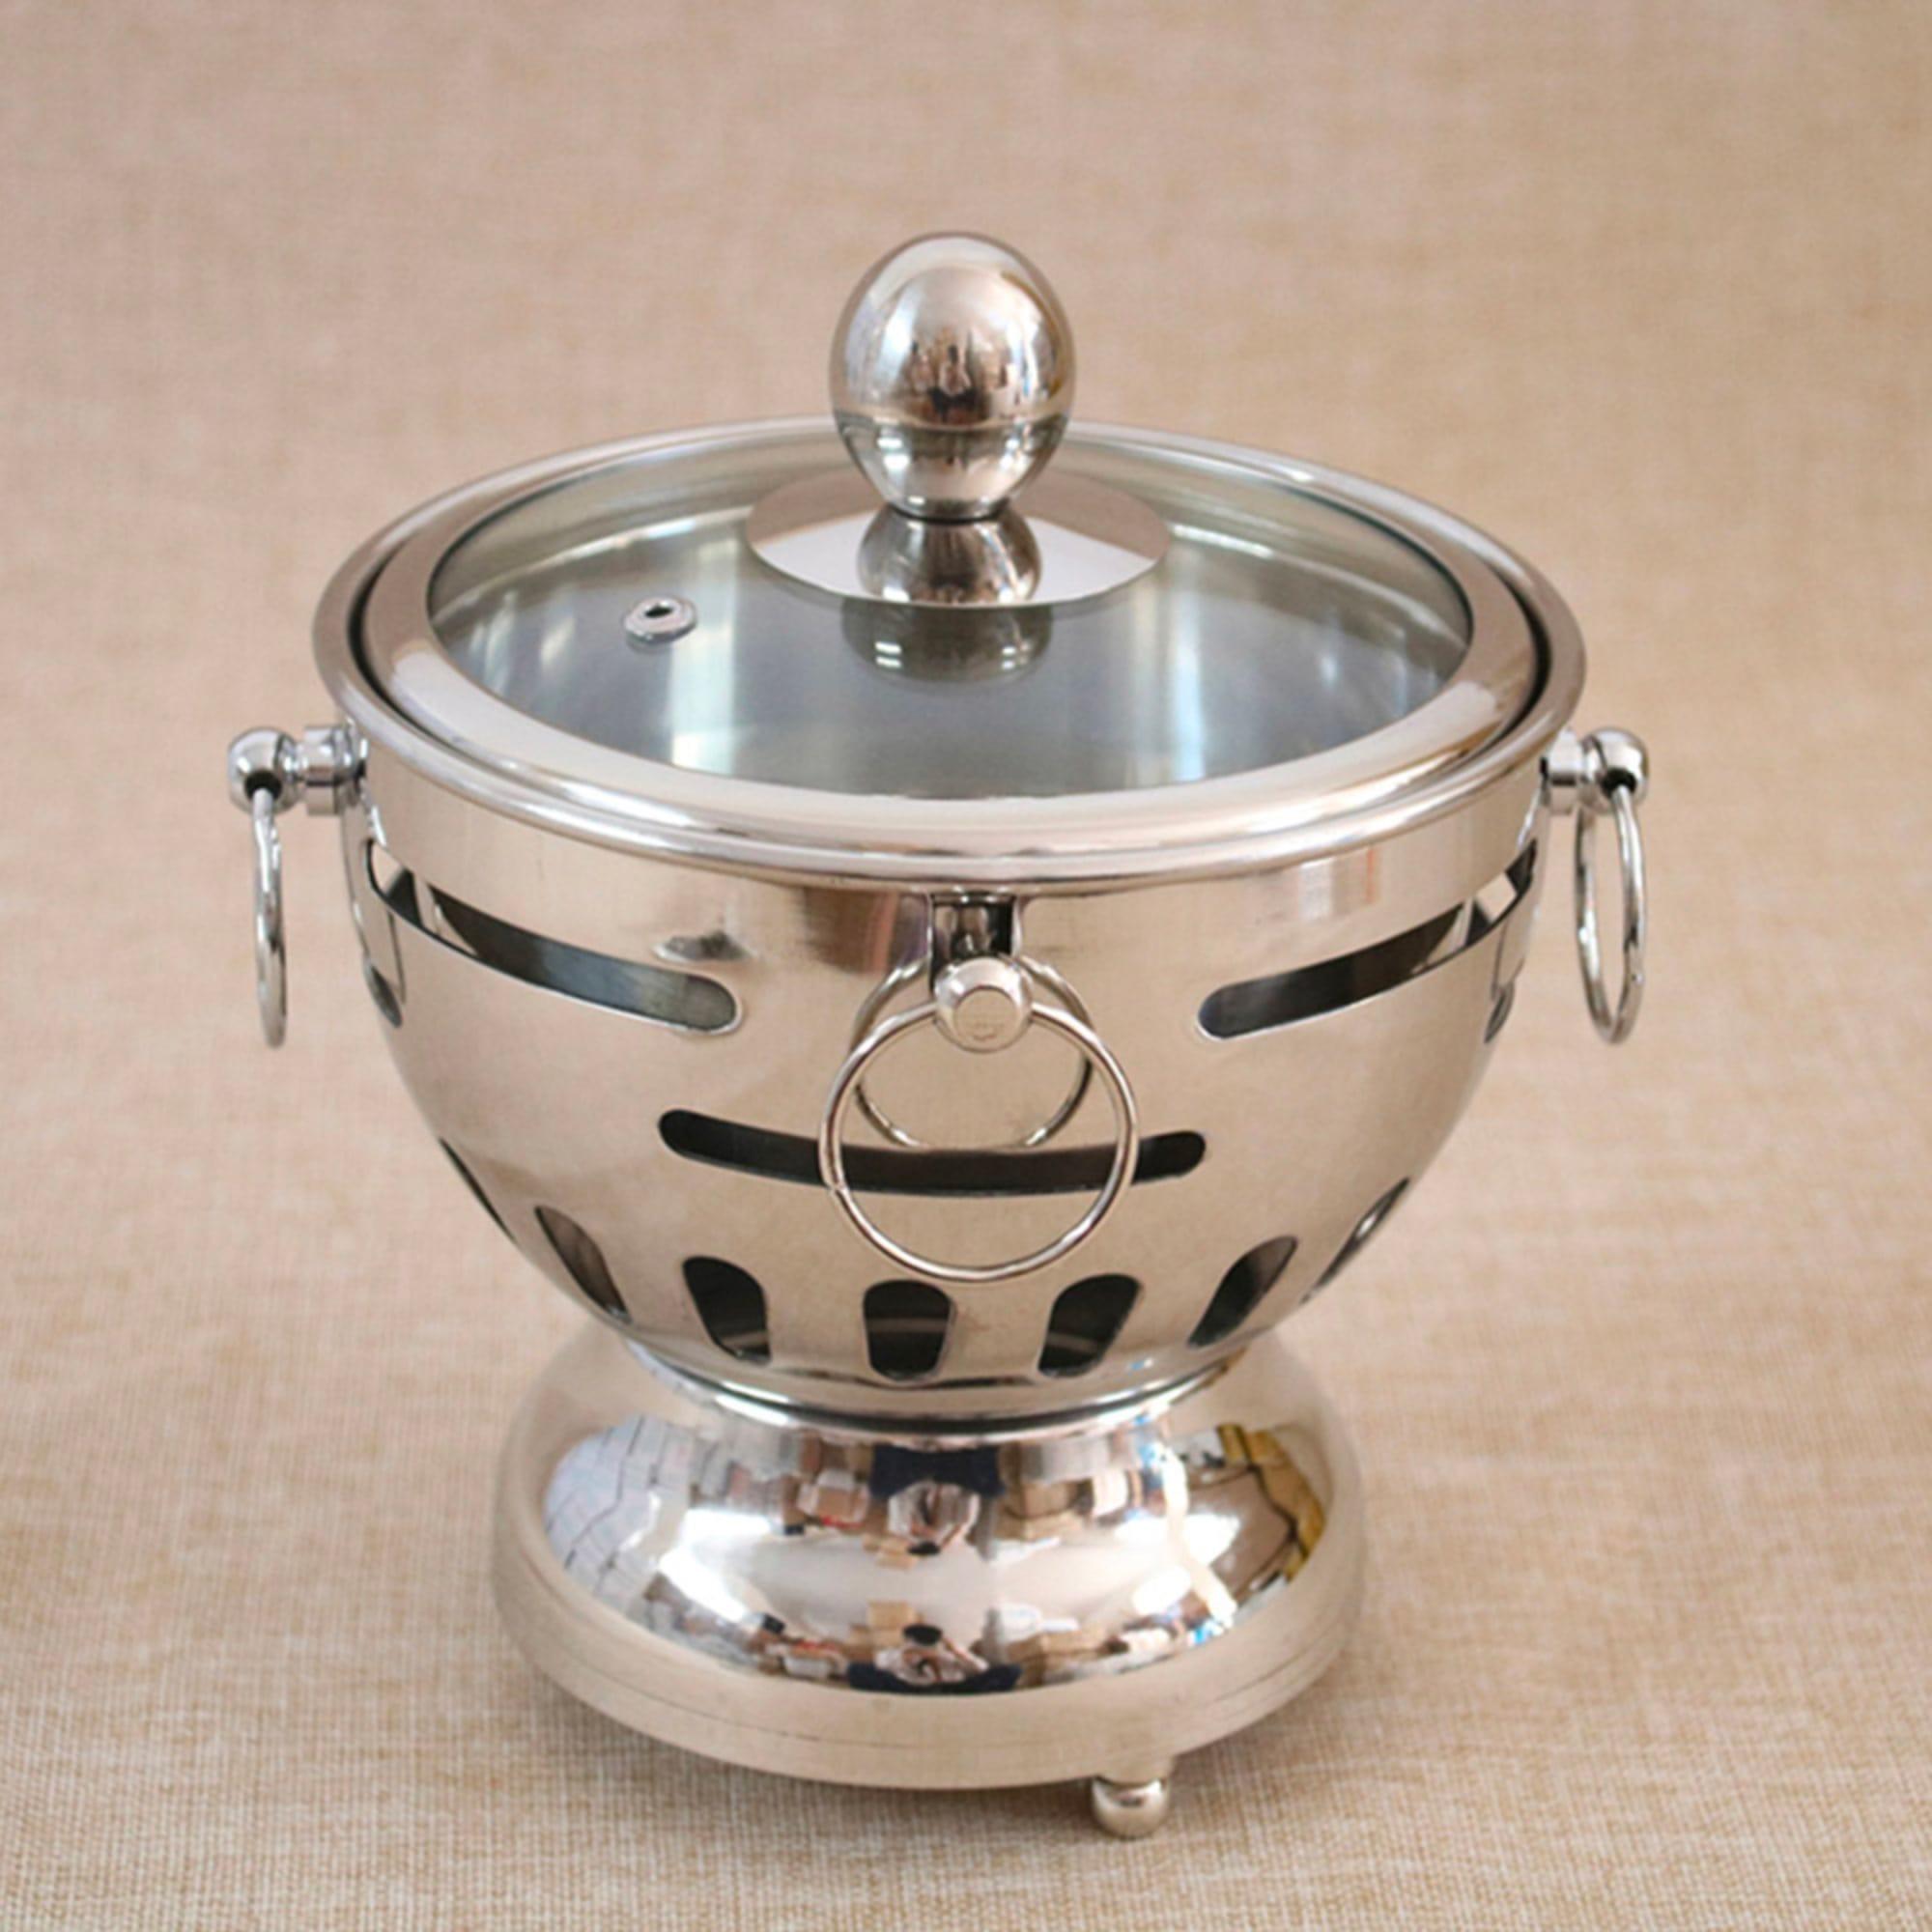 Soga Round Stainless Steel Single Hot Pot with Glass Lid 18.5cm Set of 4 Image 4